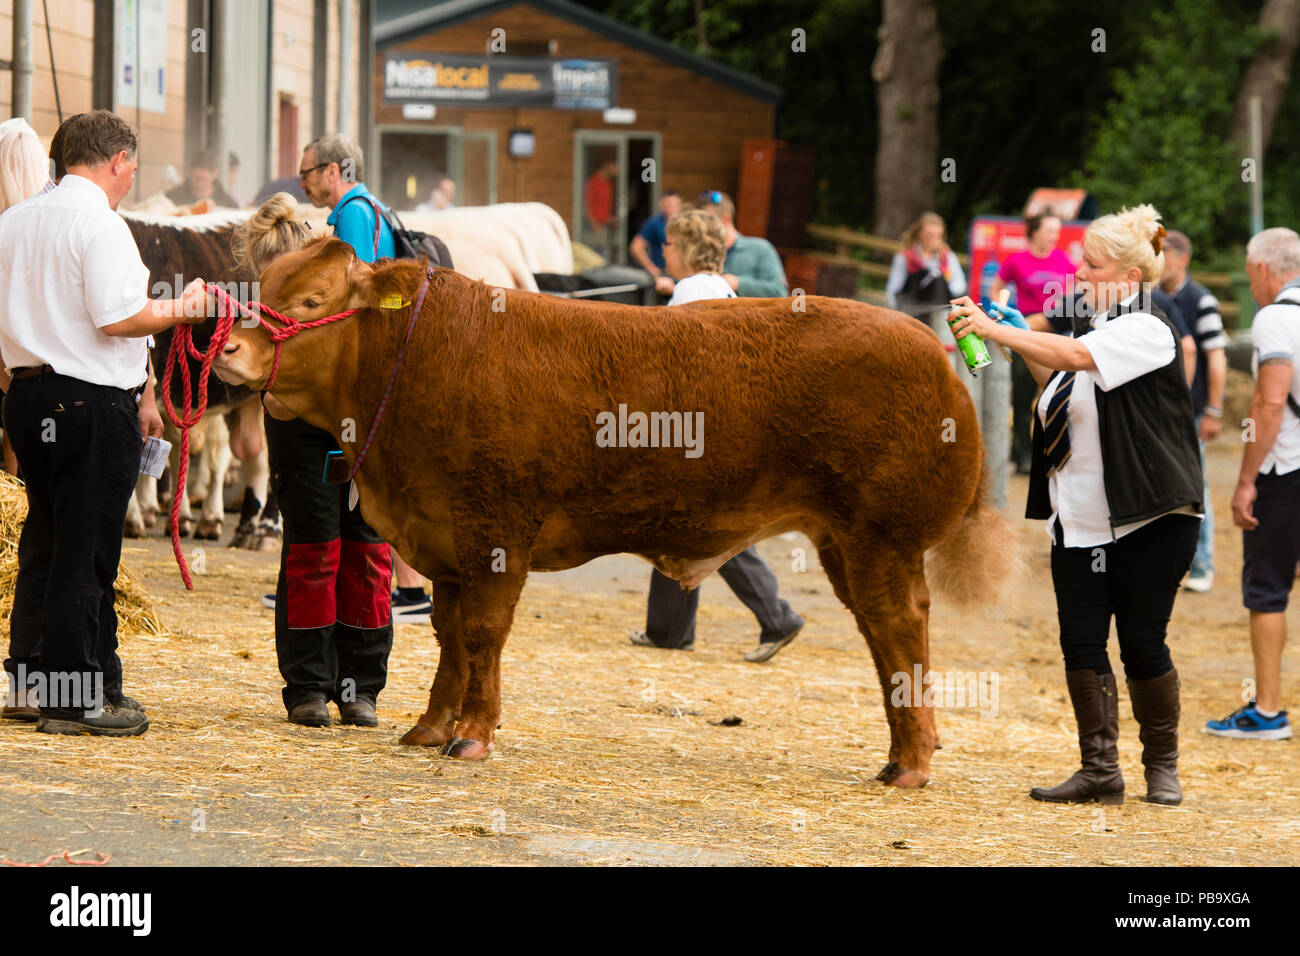 Preparing a bull for display and competition   at The Royal Welsh Show, the UK's leading agriculture and farming event, held annually at the purpose built show ground at Builth Wells, Powys, Wales Stock Photo